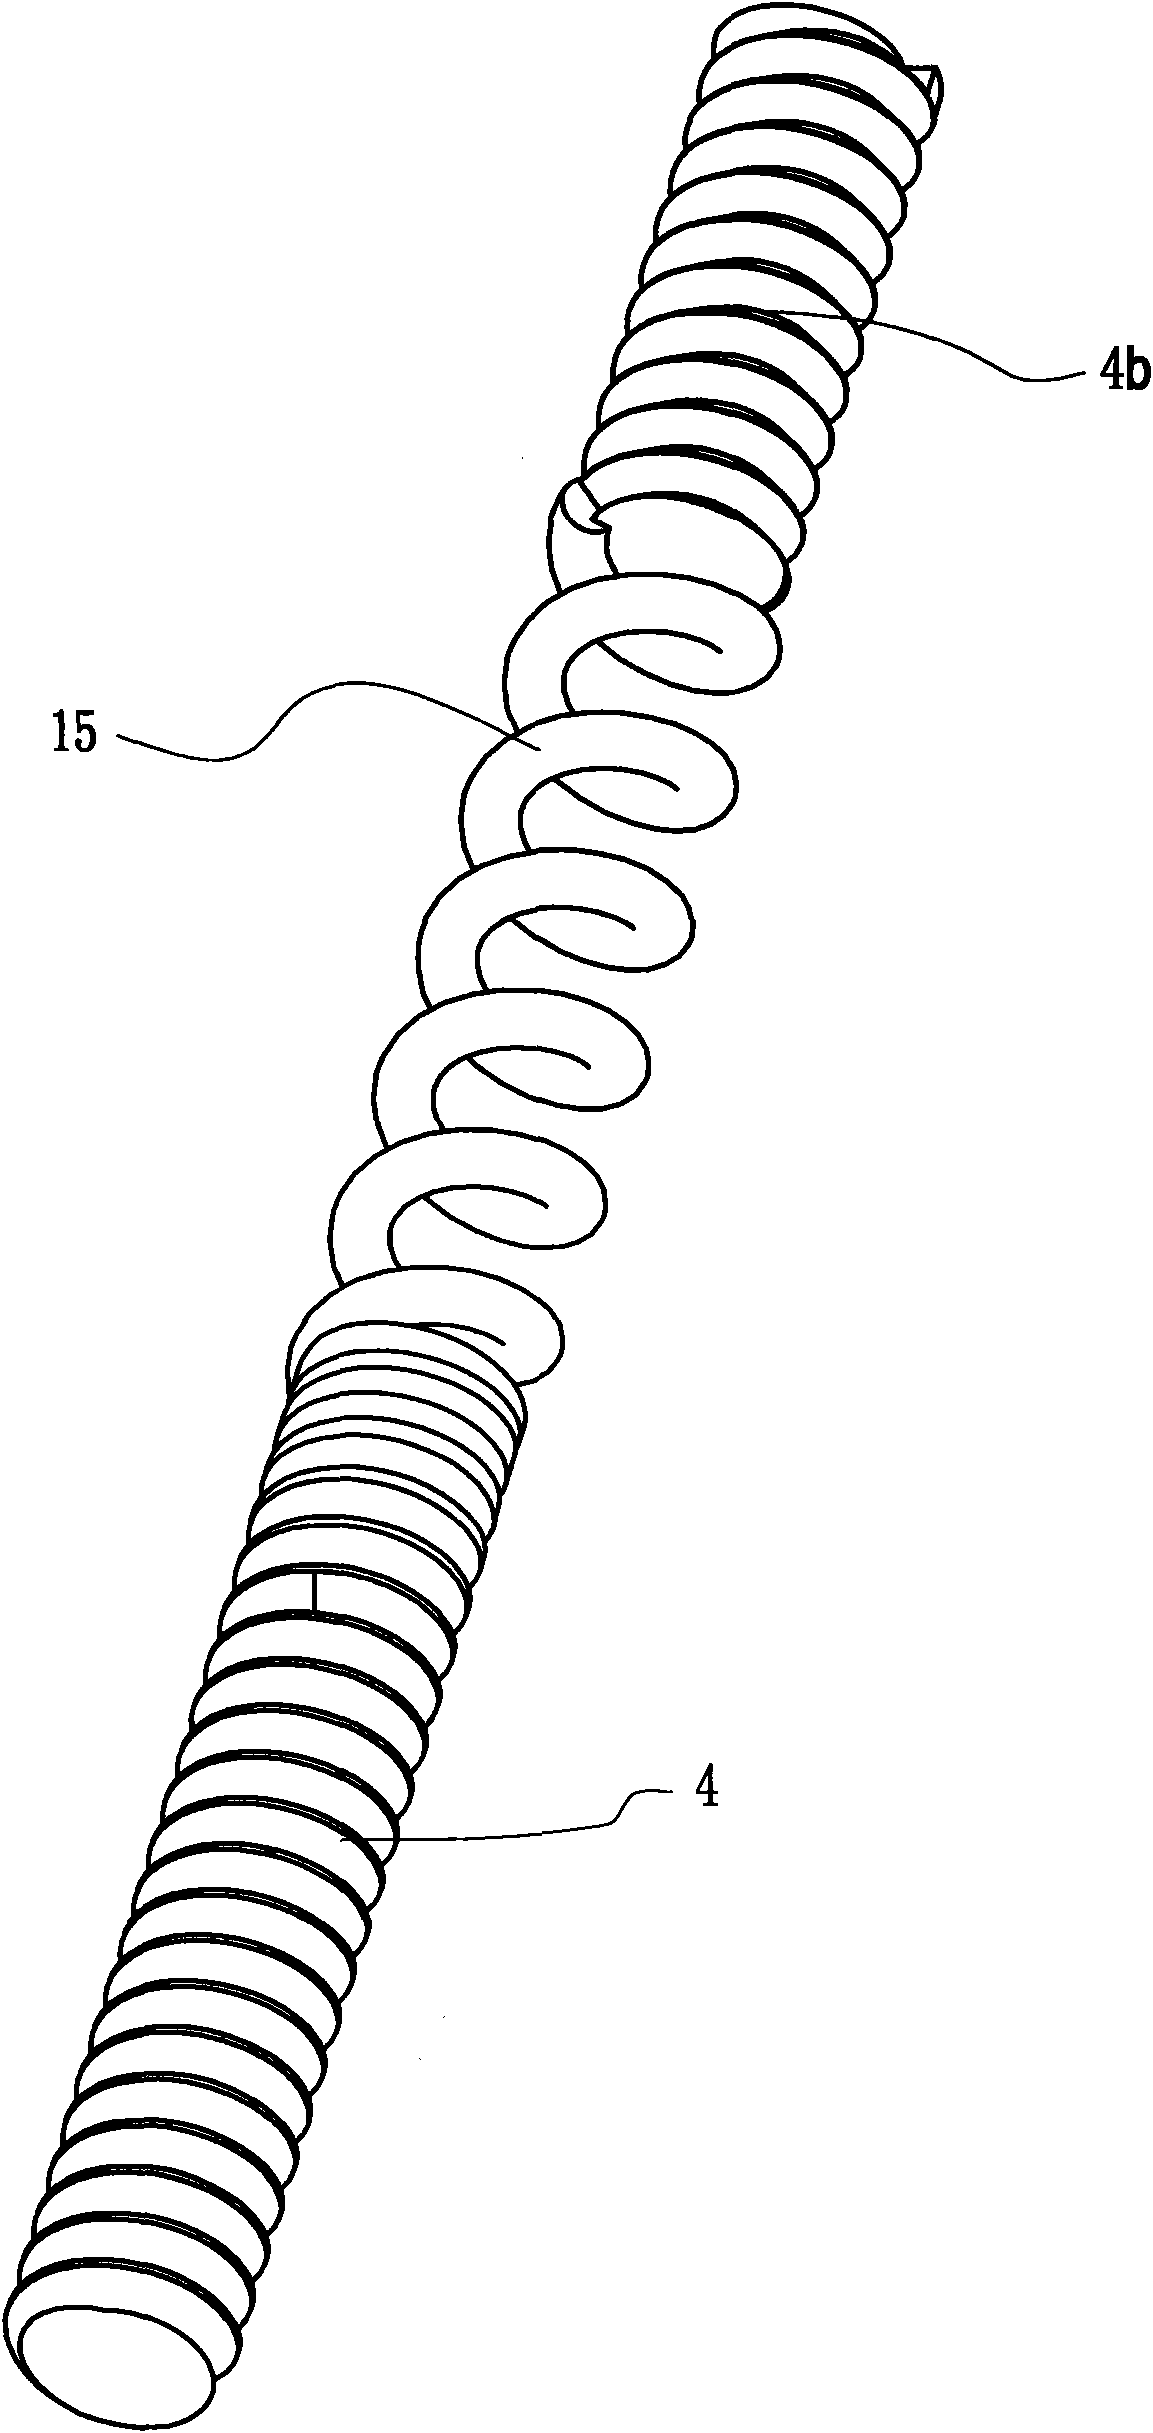 Spark plug of gasoline engine with multiple laterals and multifold gap